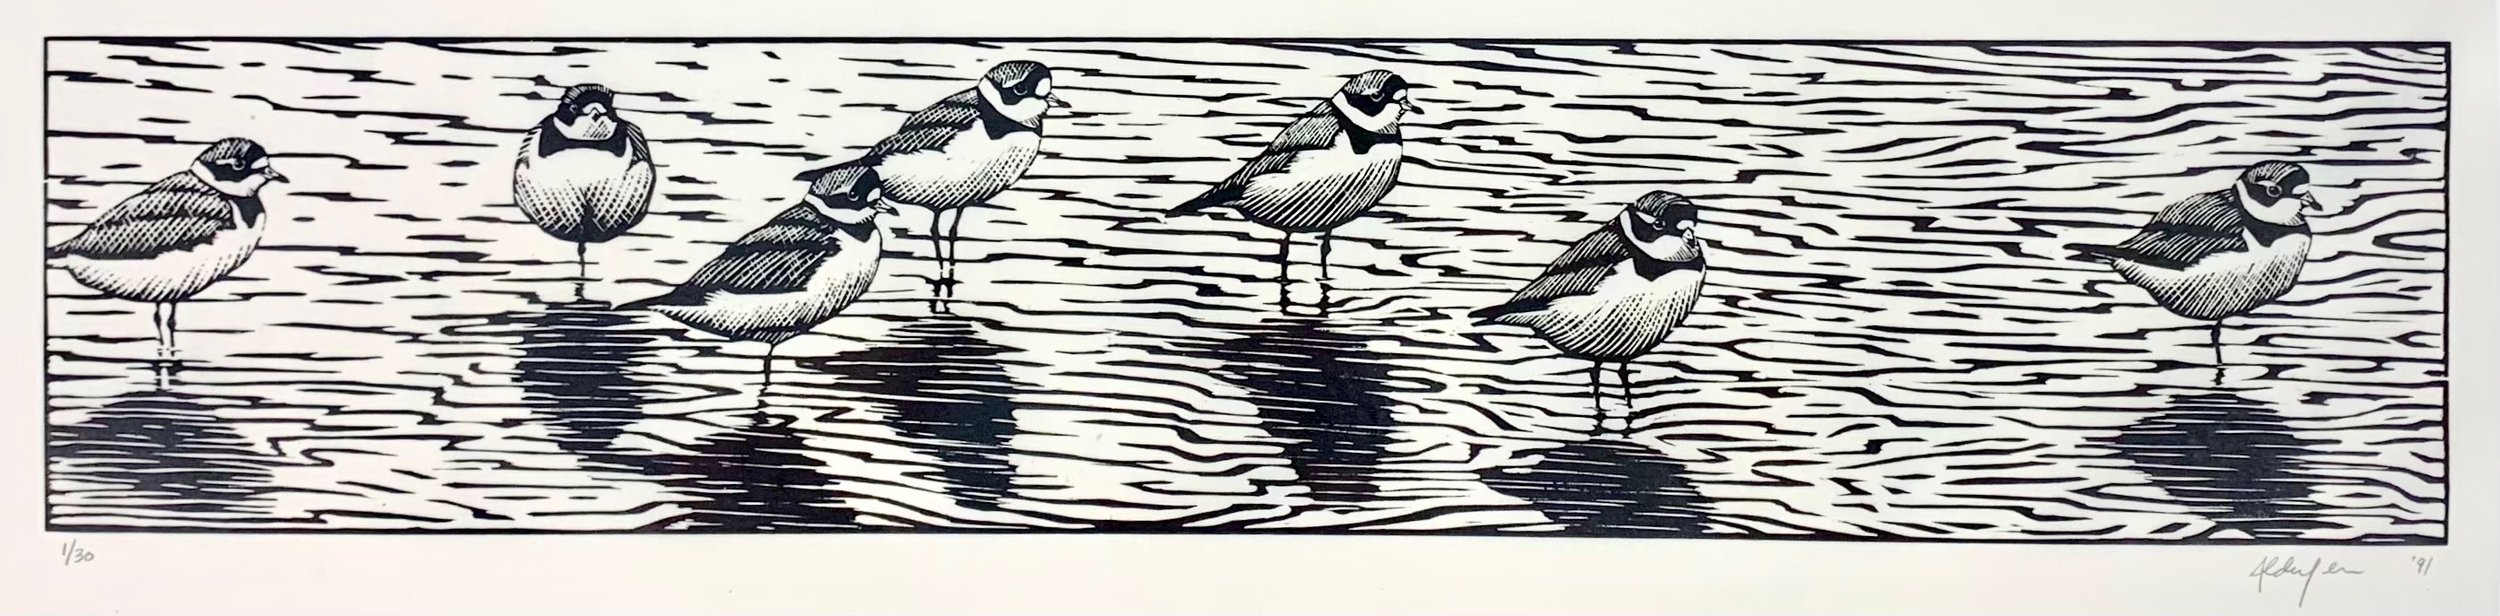 Seven Semipalmated Plovers, 1991  (Copy)